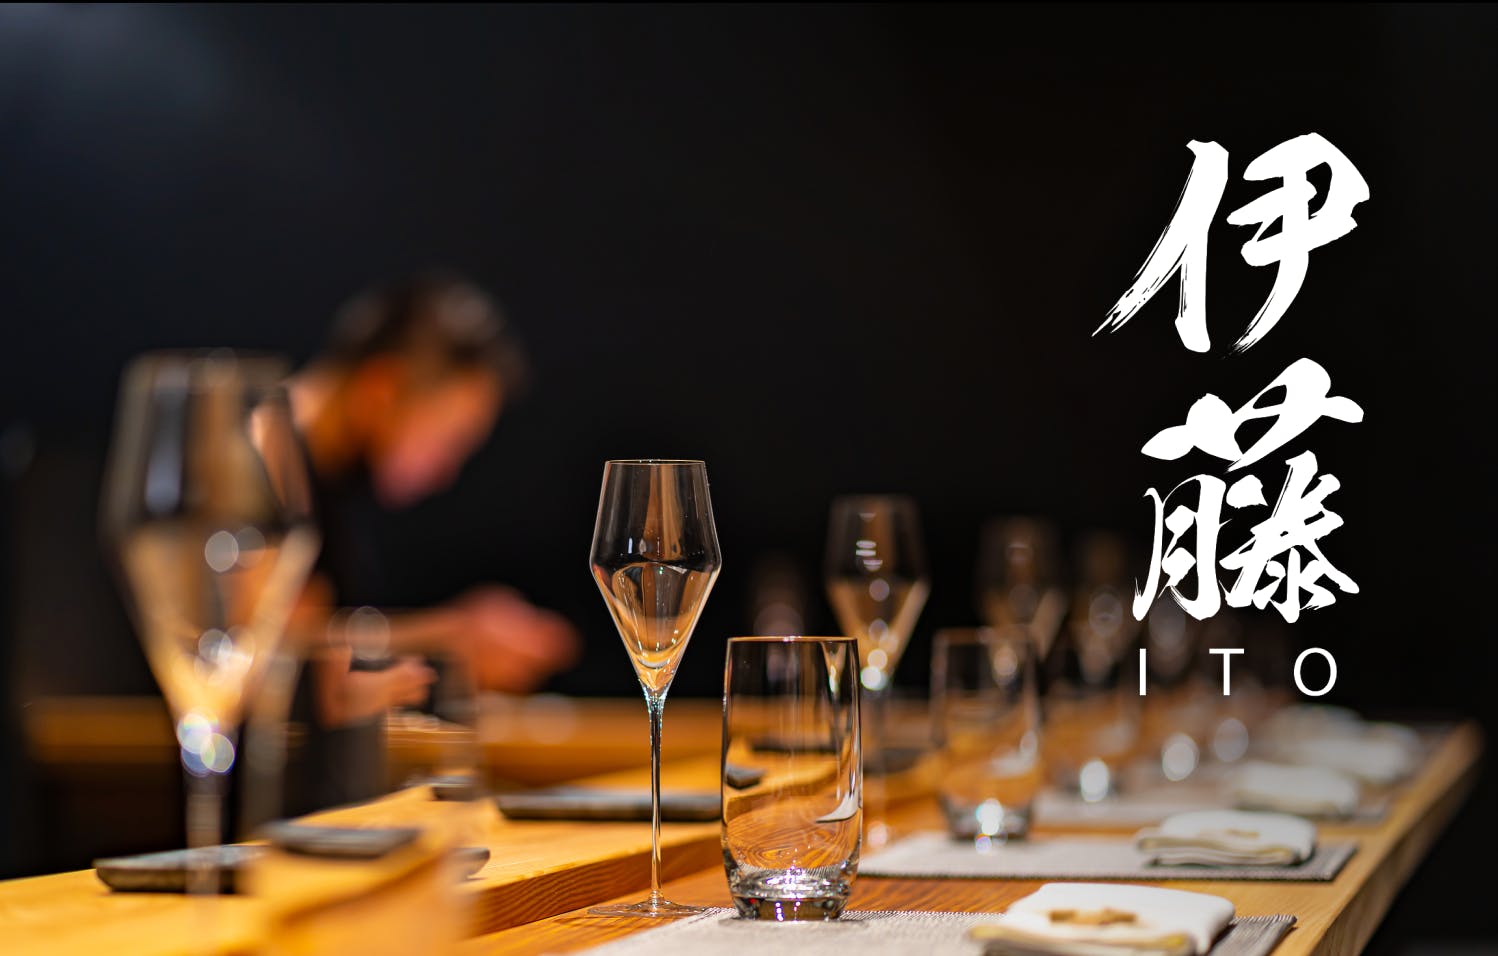 Omakase place settings and the Ito logo